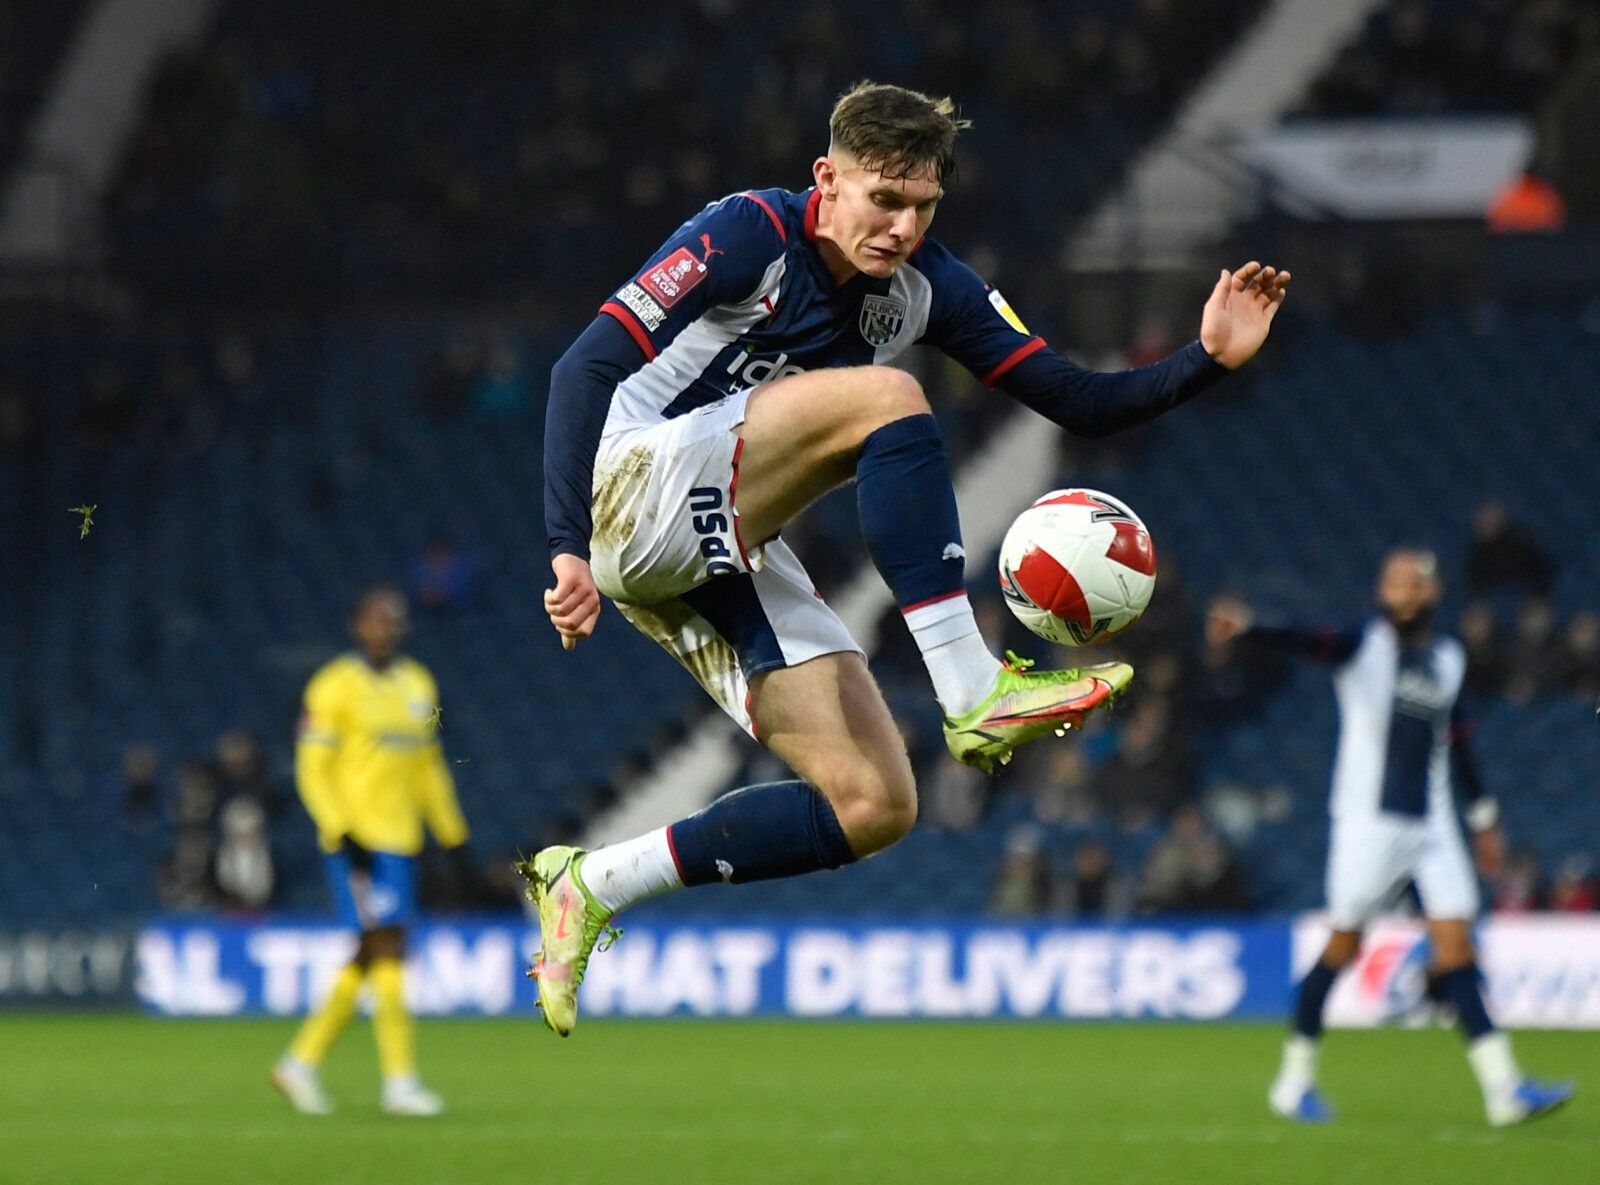 Soccer Football - FA Cup Third Round - West Bromwich Albion v Brighton &amp; Hove Albion - The Hawthorns, West Bromwich, Britain - January 8, 2022 West Bromwich Albion's Taylor Gardner-Hickman in action REUTERS/Toby Melville